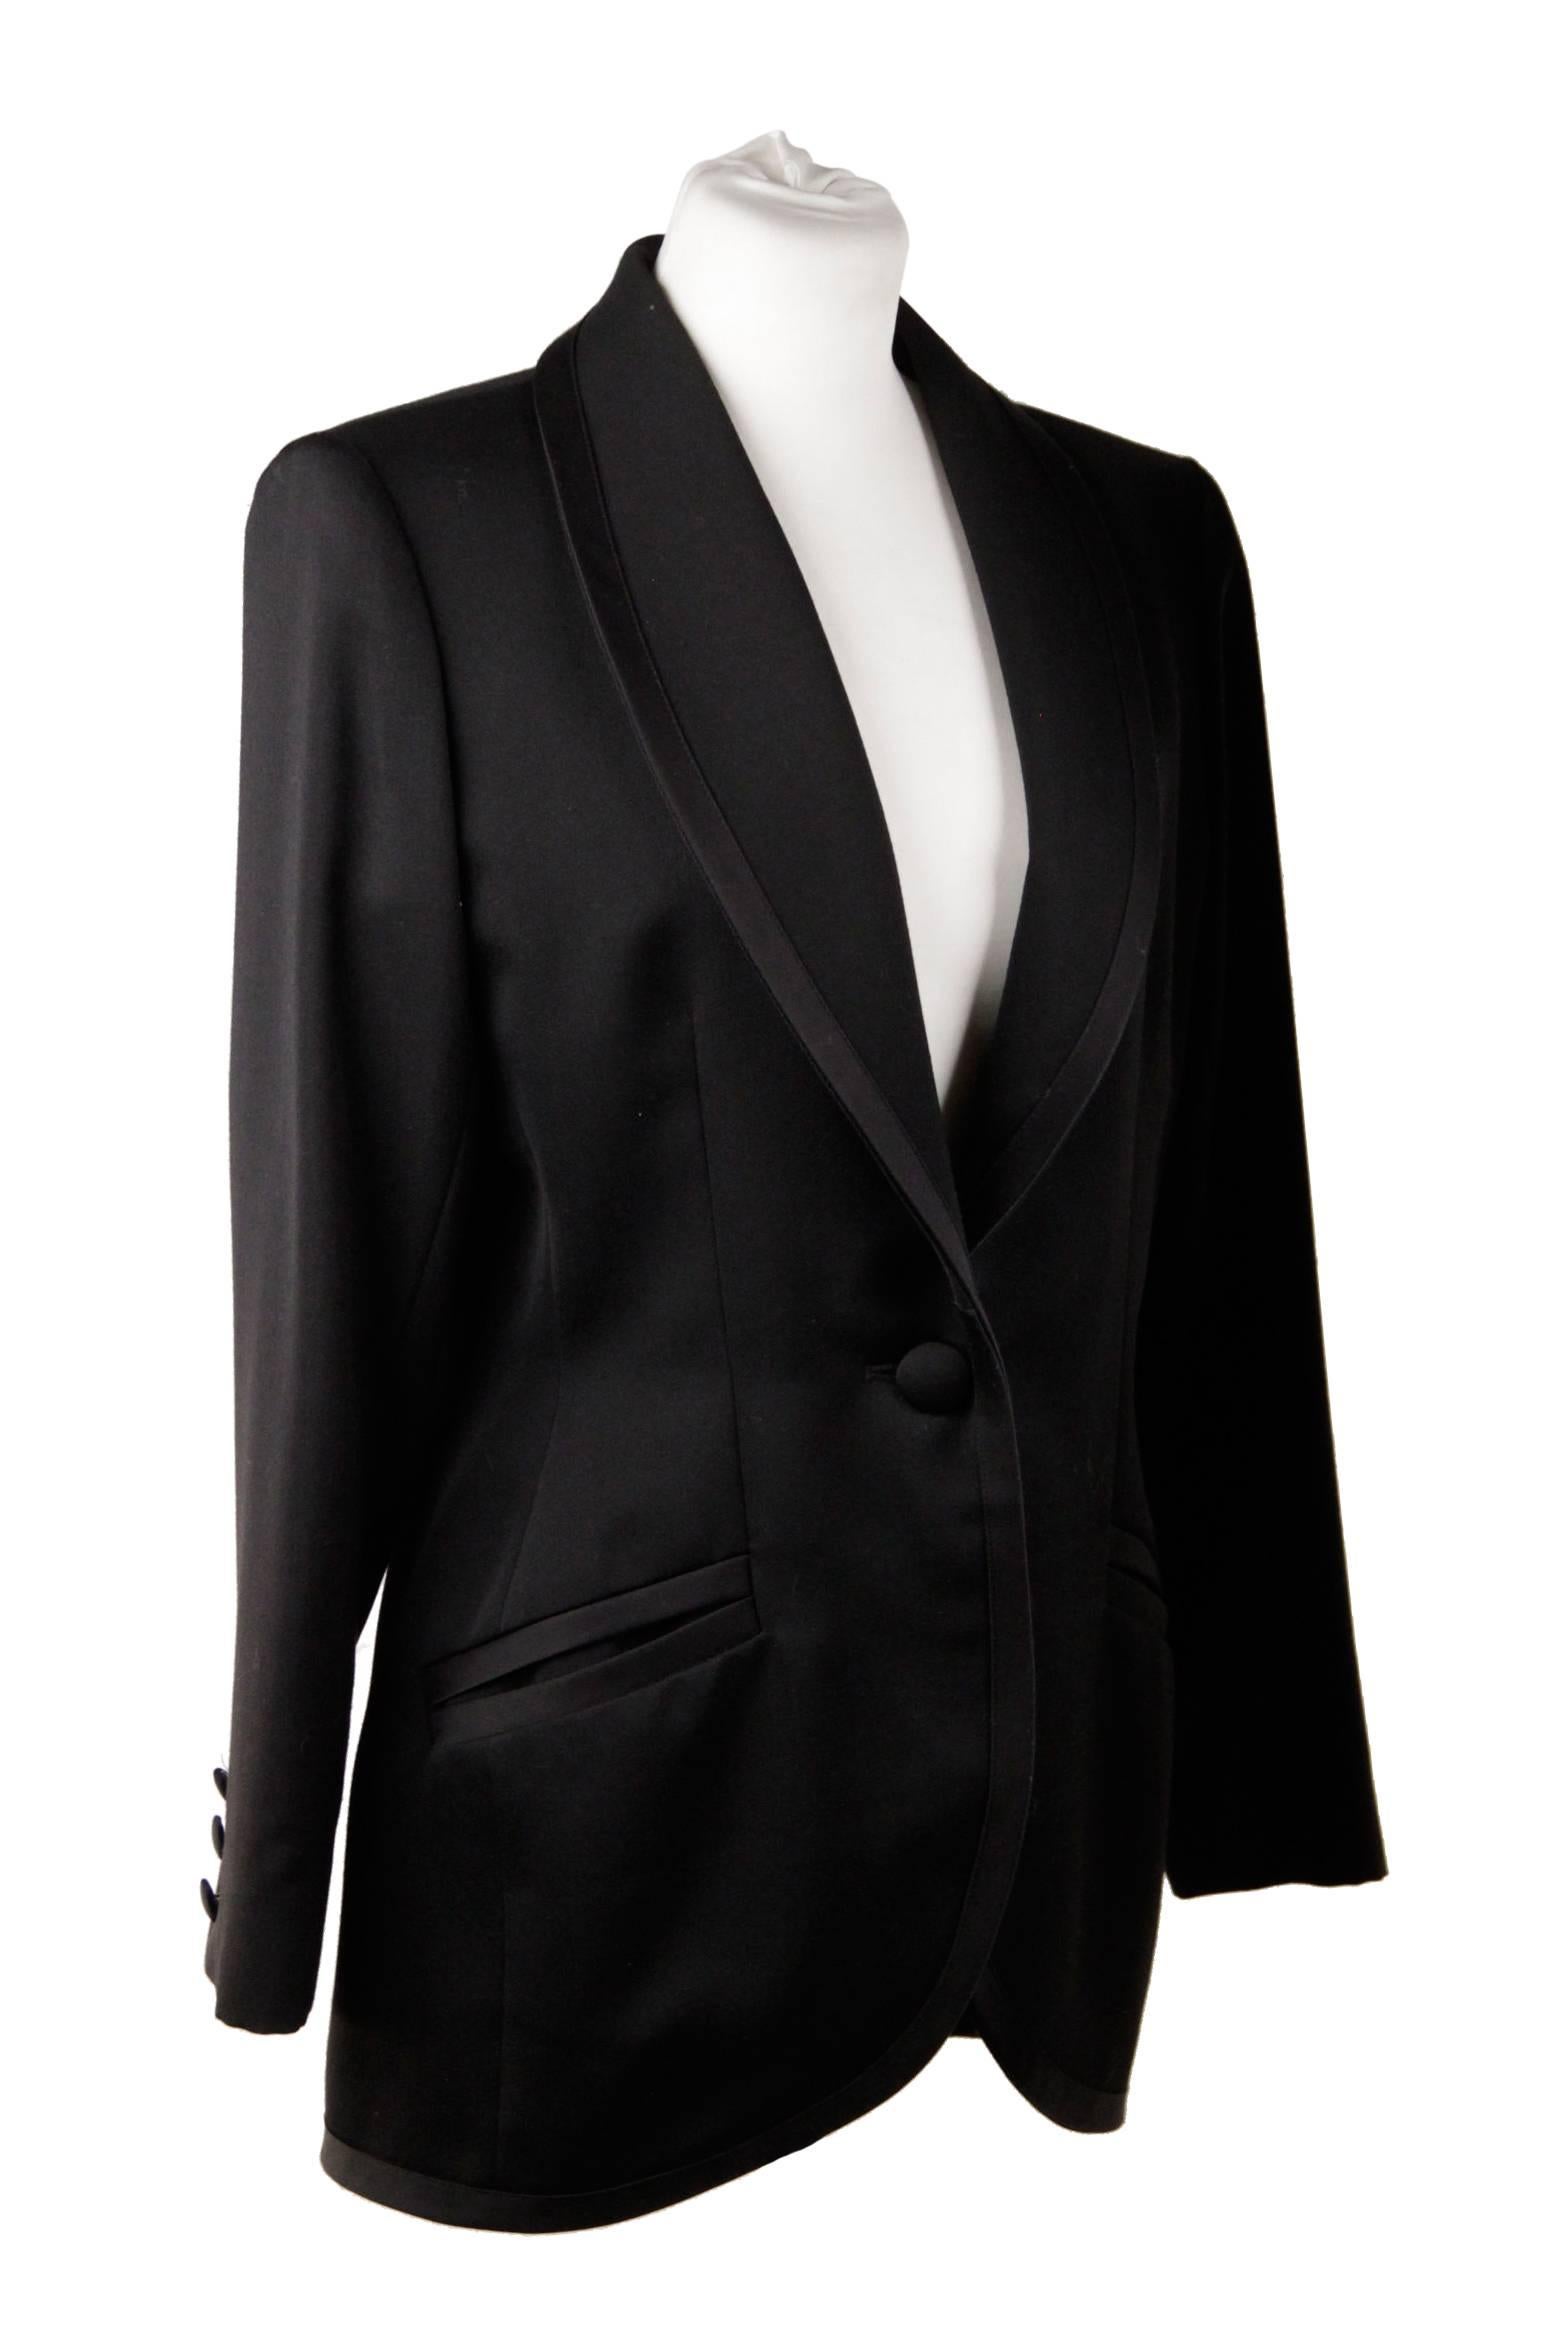  - YVES SAINT LAURENT VARIATION Tuxedo suit
- Black color
- Trousers with front button & zip closure
- Single button closure on the blazer
- Satin trim
- Size is not indicated. Estimated size is a SMALL/MEDIUM size

Logos / Tags: 'YVES SAINT